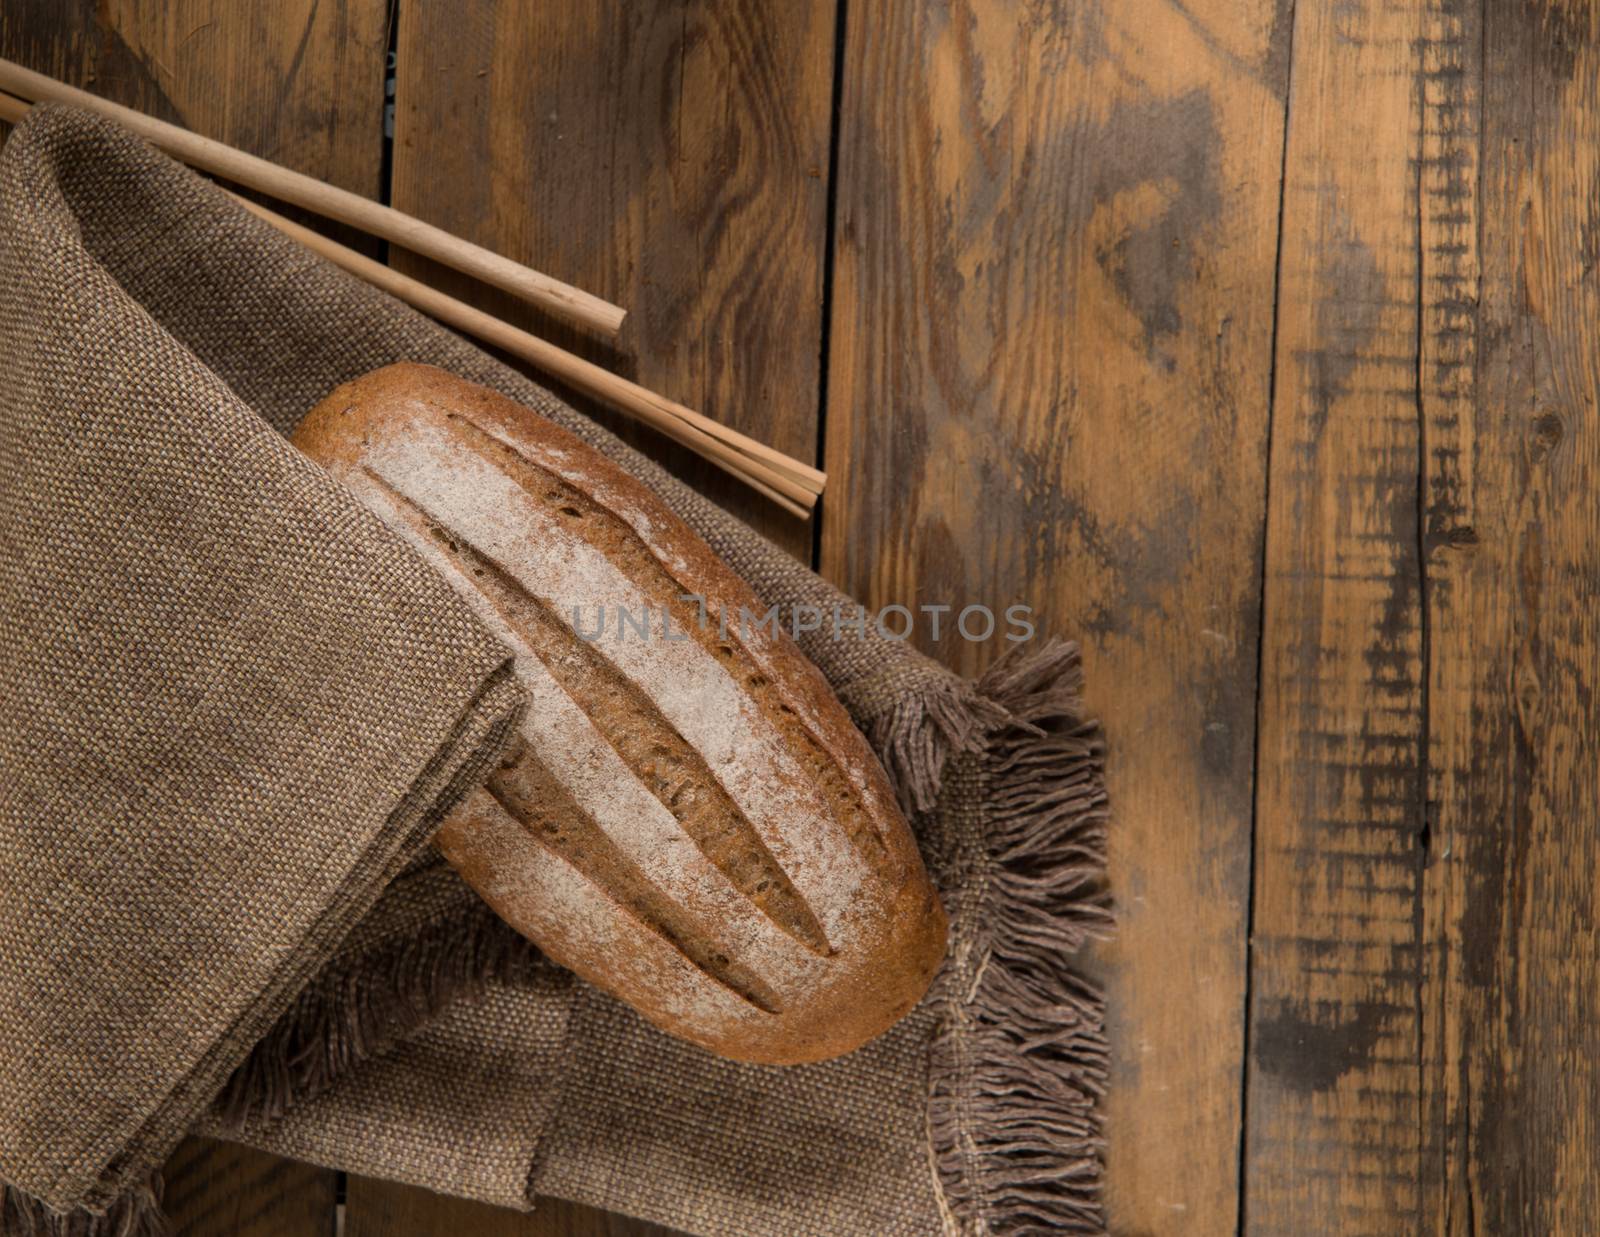 a loaf of bread on a napkin and spikelets on wooden surface, view from above